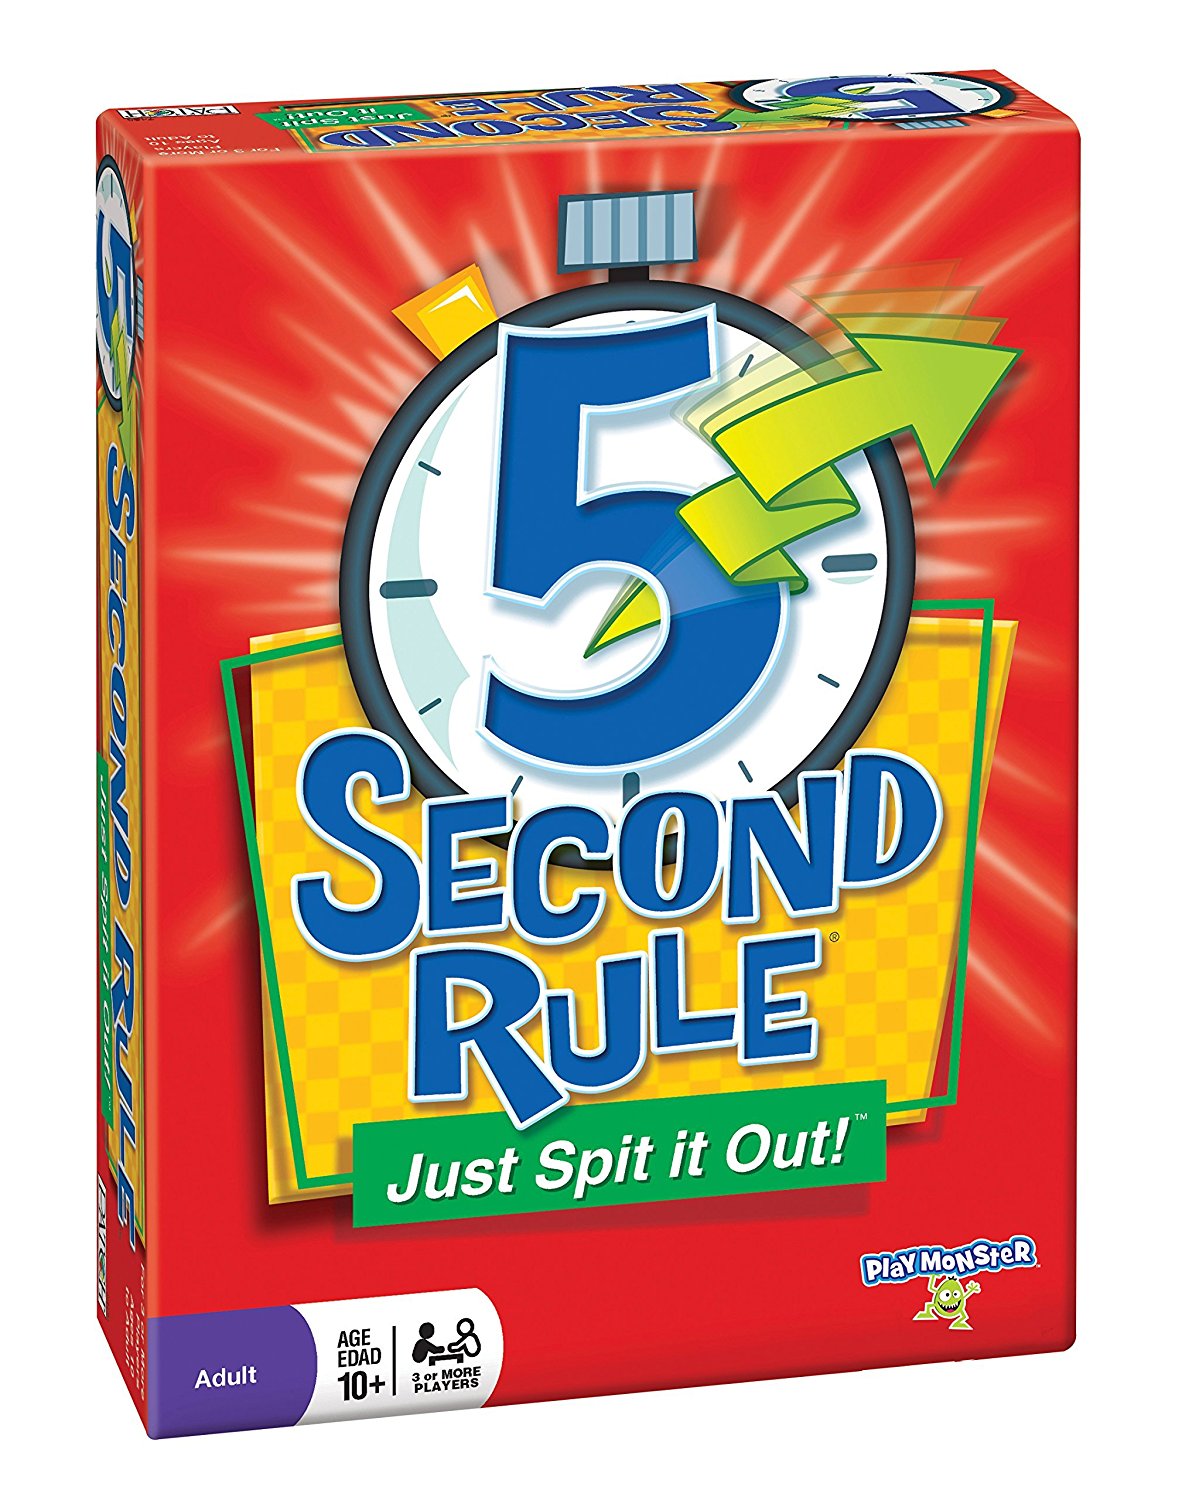 5-Second-rule